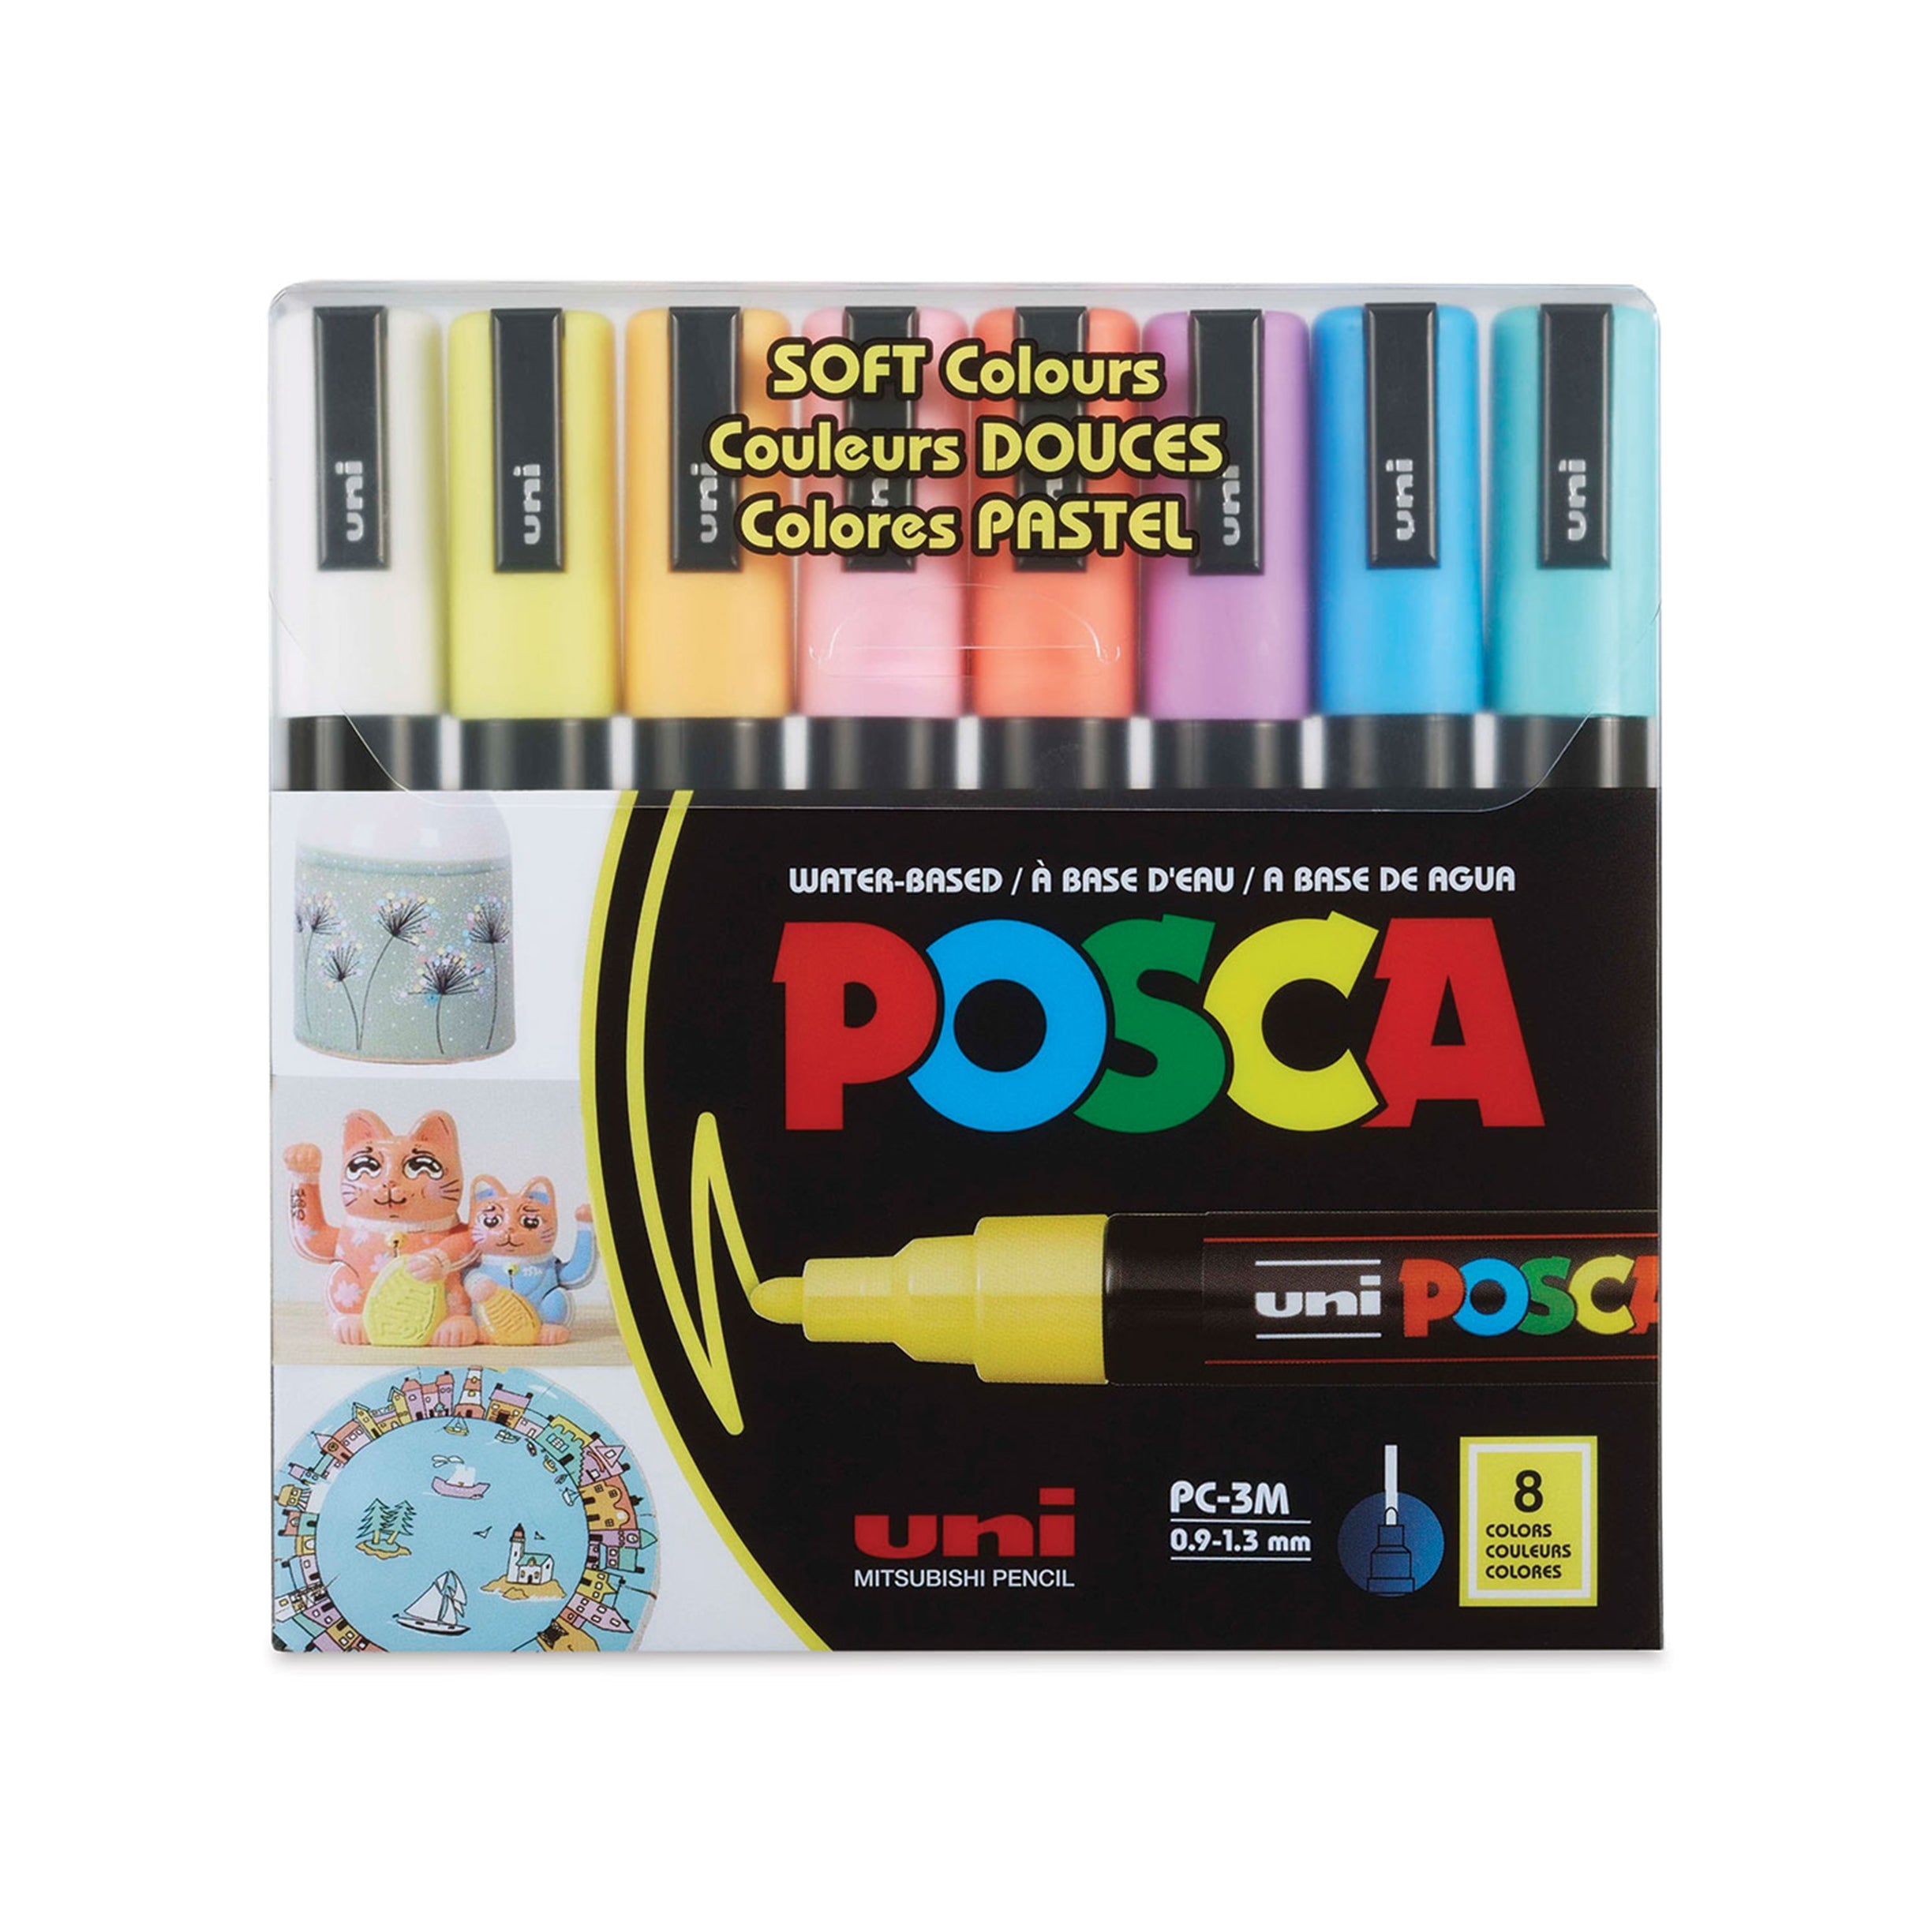 Hoelahoep Mathis Afsnijden Uni-POSCA PC-3M Fine Tip Paint Markers, Soft Colors Set of 8 — ArtSnacks